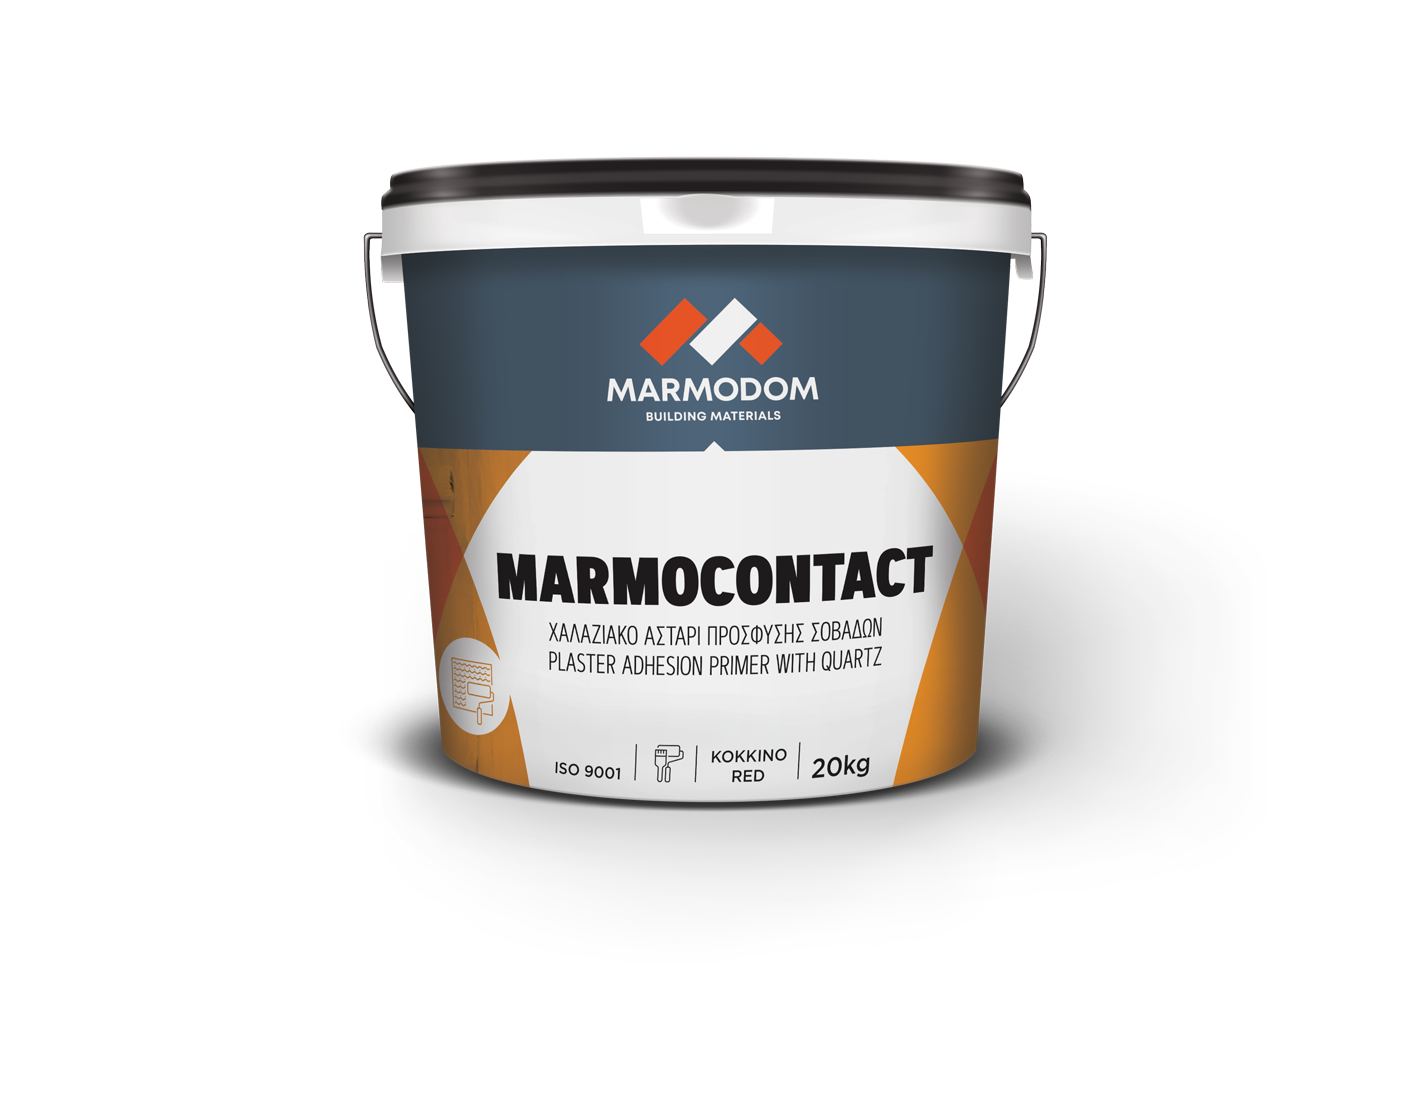 Marmodom MARMOCONTACT 20kg Lime plaster adhesion primer (Red)